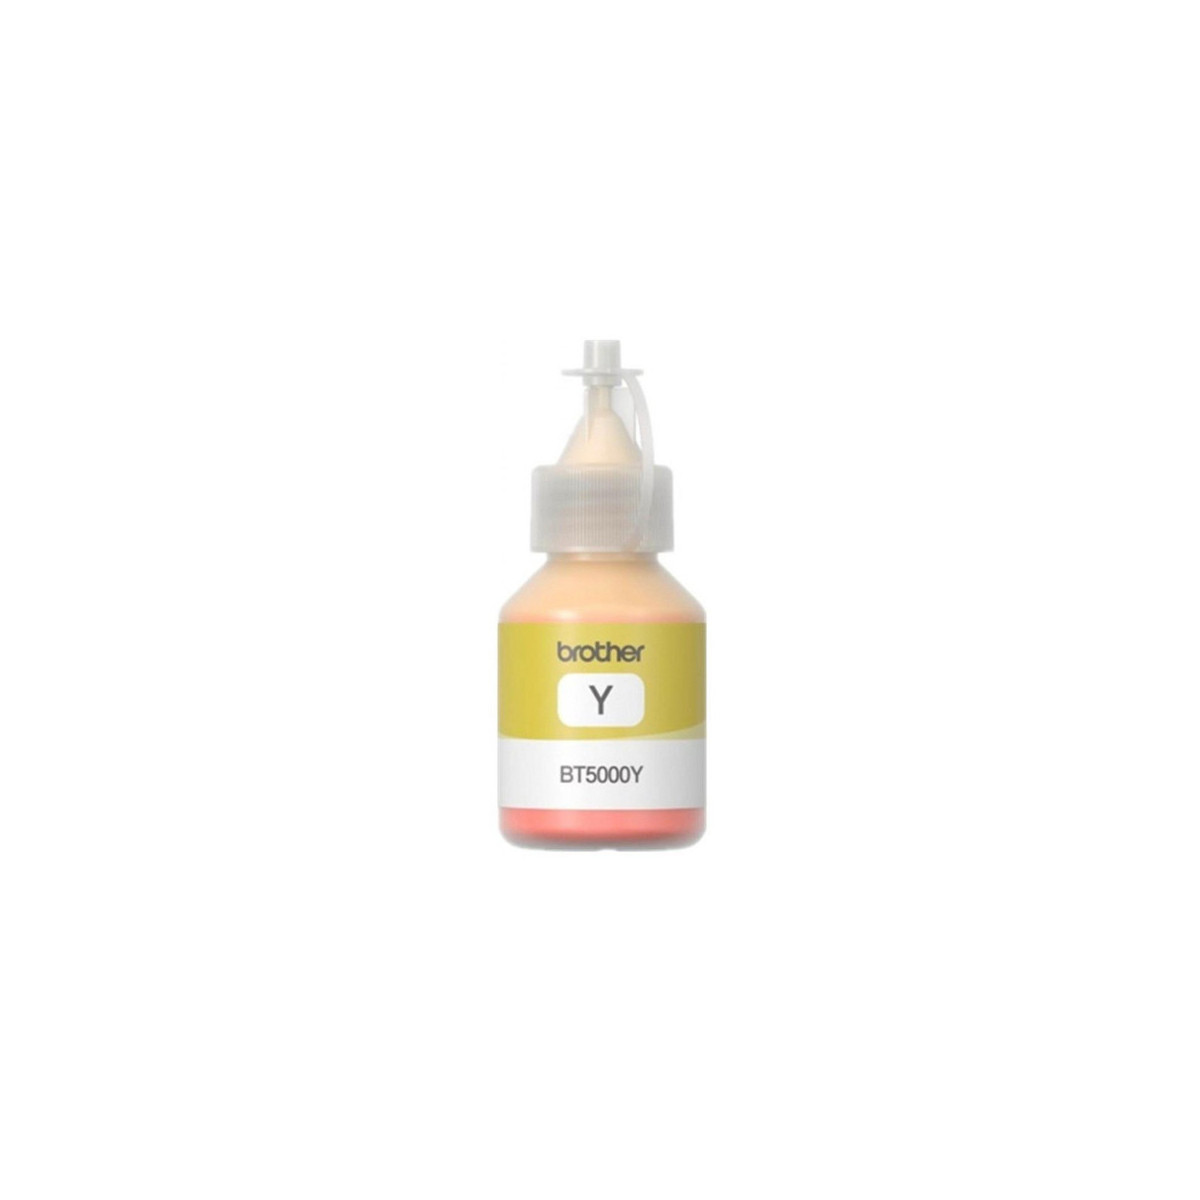 BOUTEILLE D'ENCRE ADAPTABLE BROTHER BT5000Y - 100ML - YELLOW